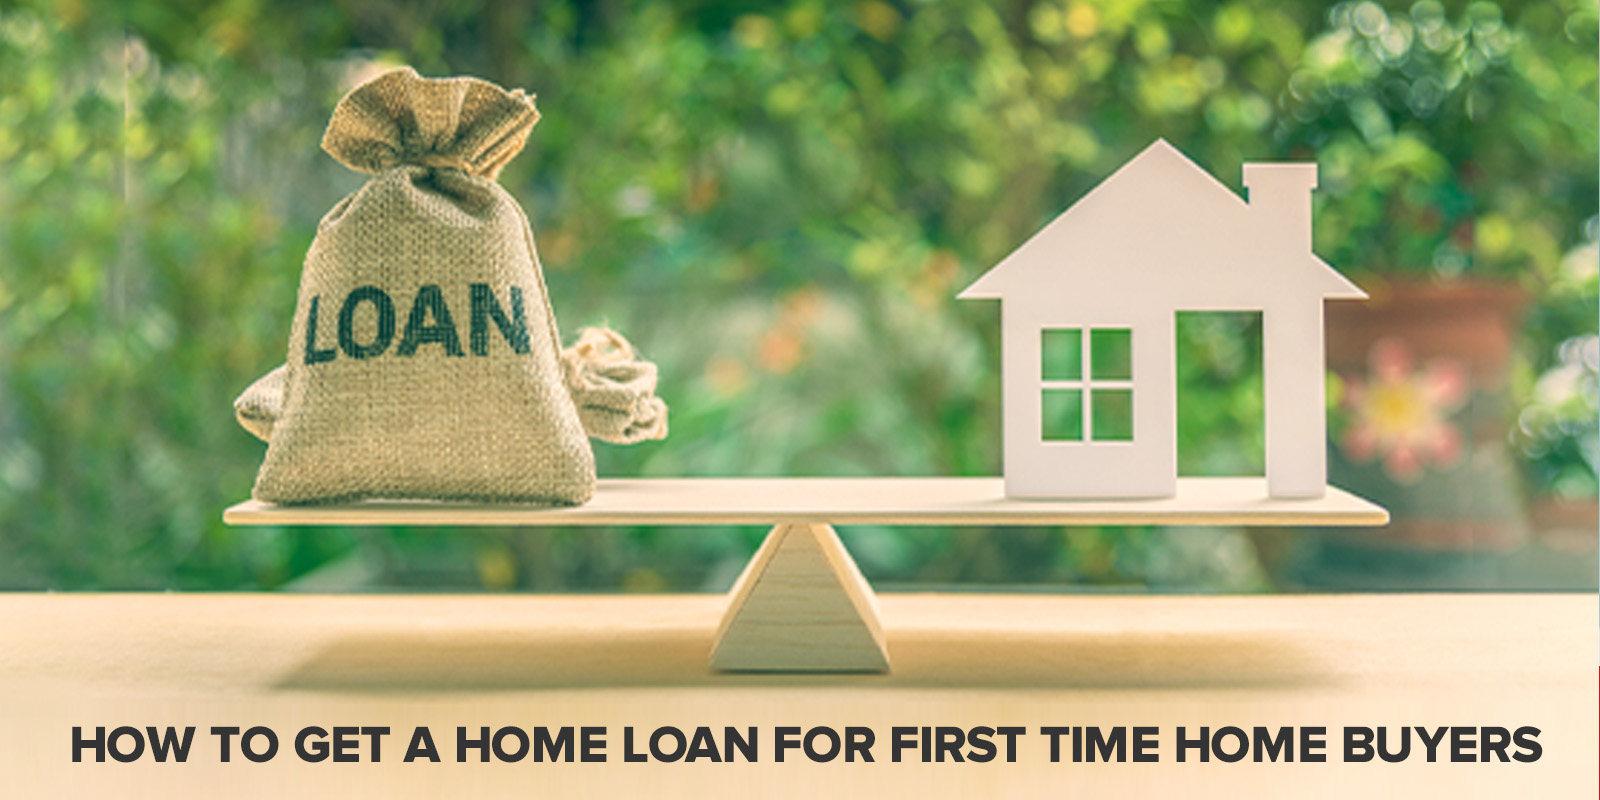 How to Get a Home Loan for First-Time Homebuyers